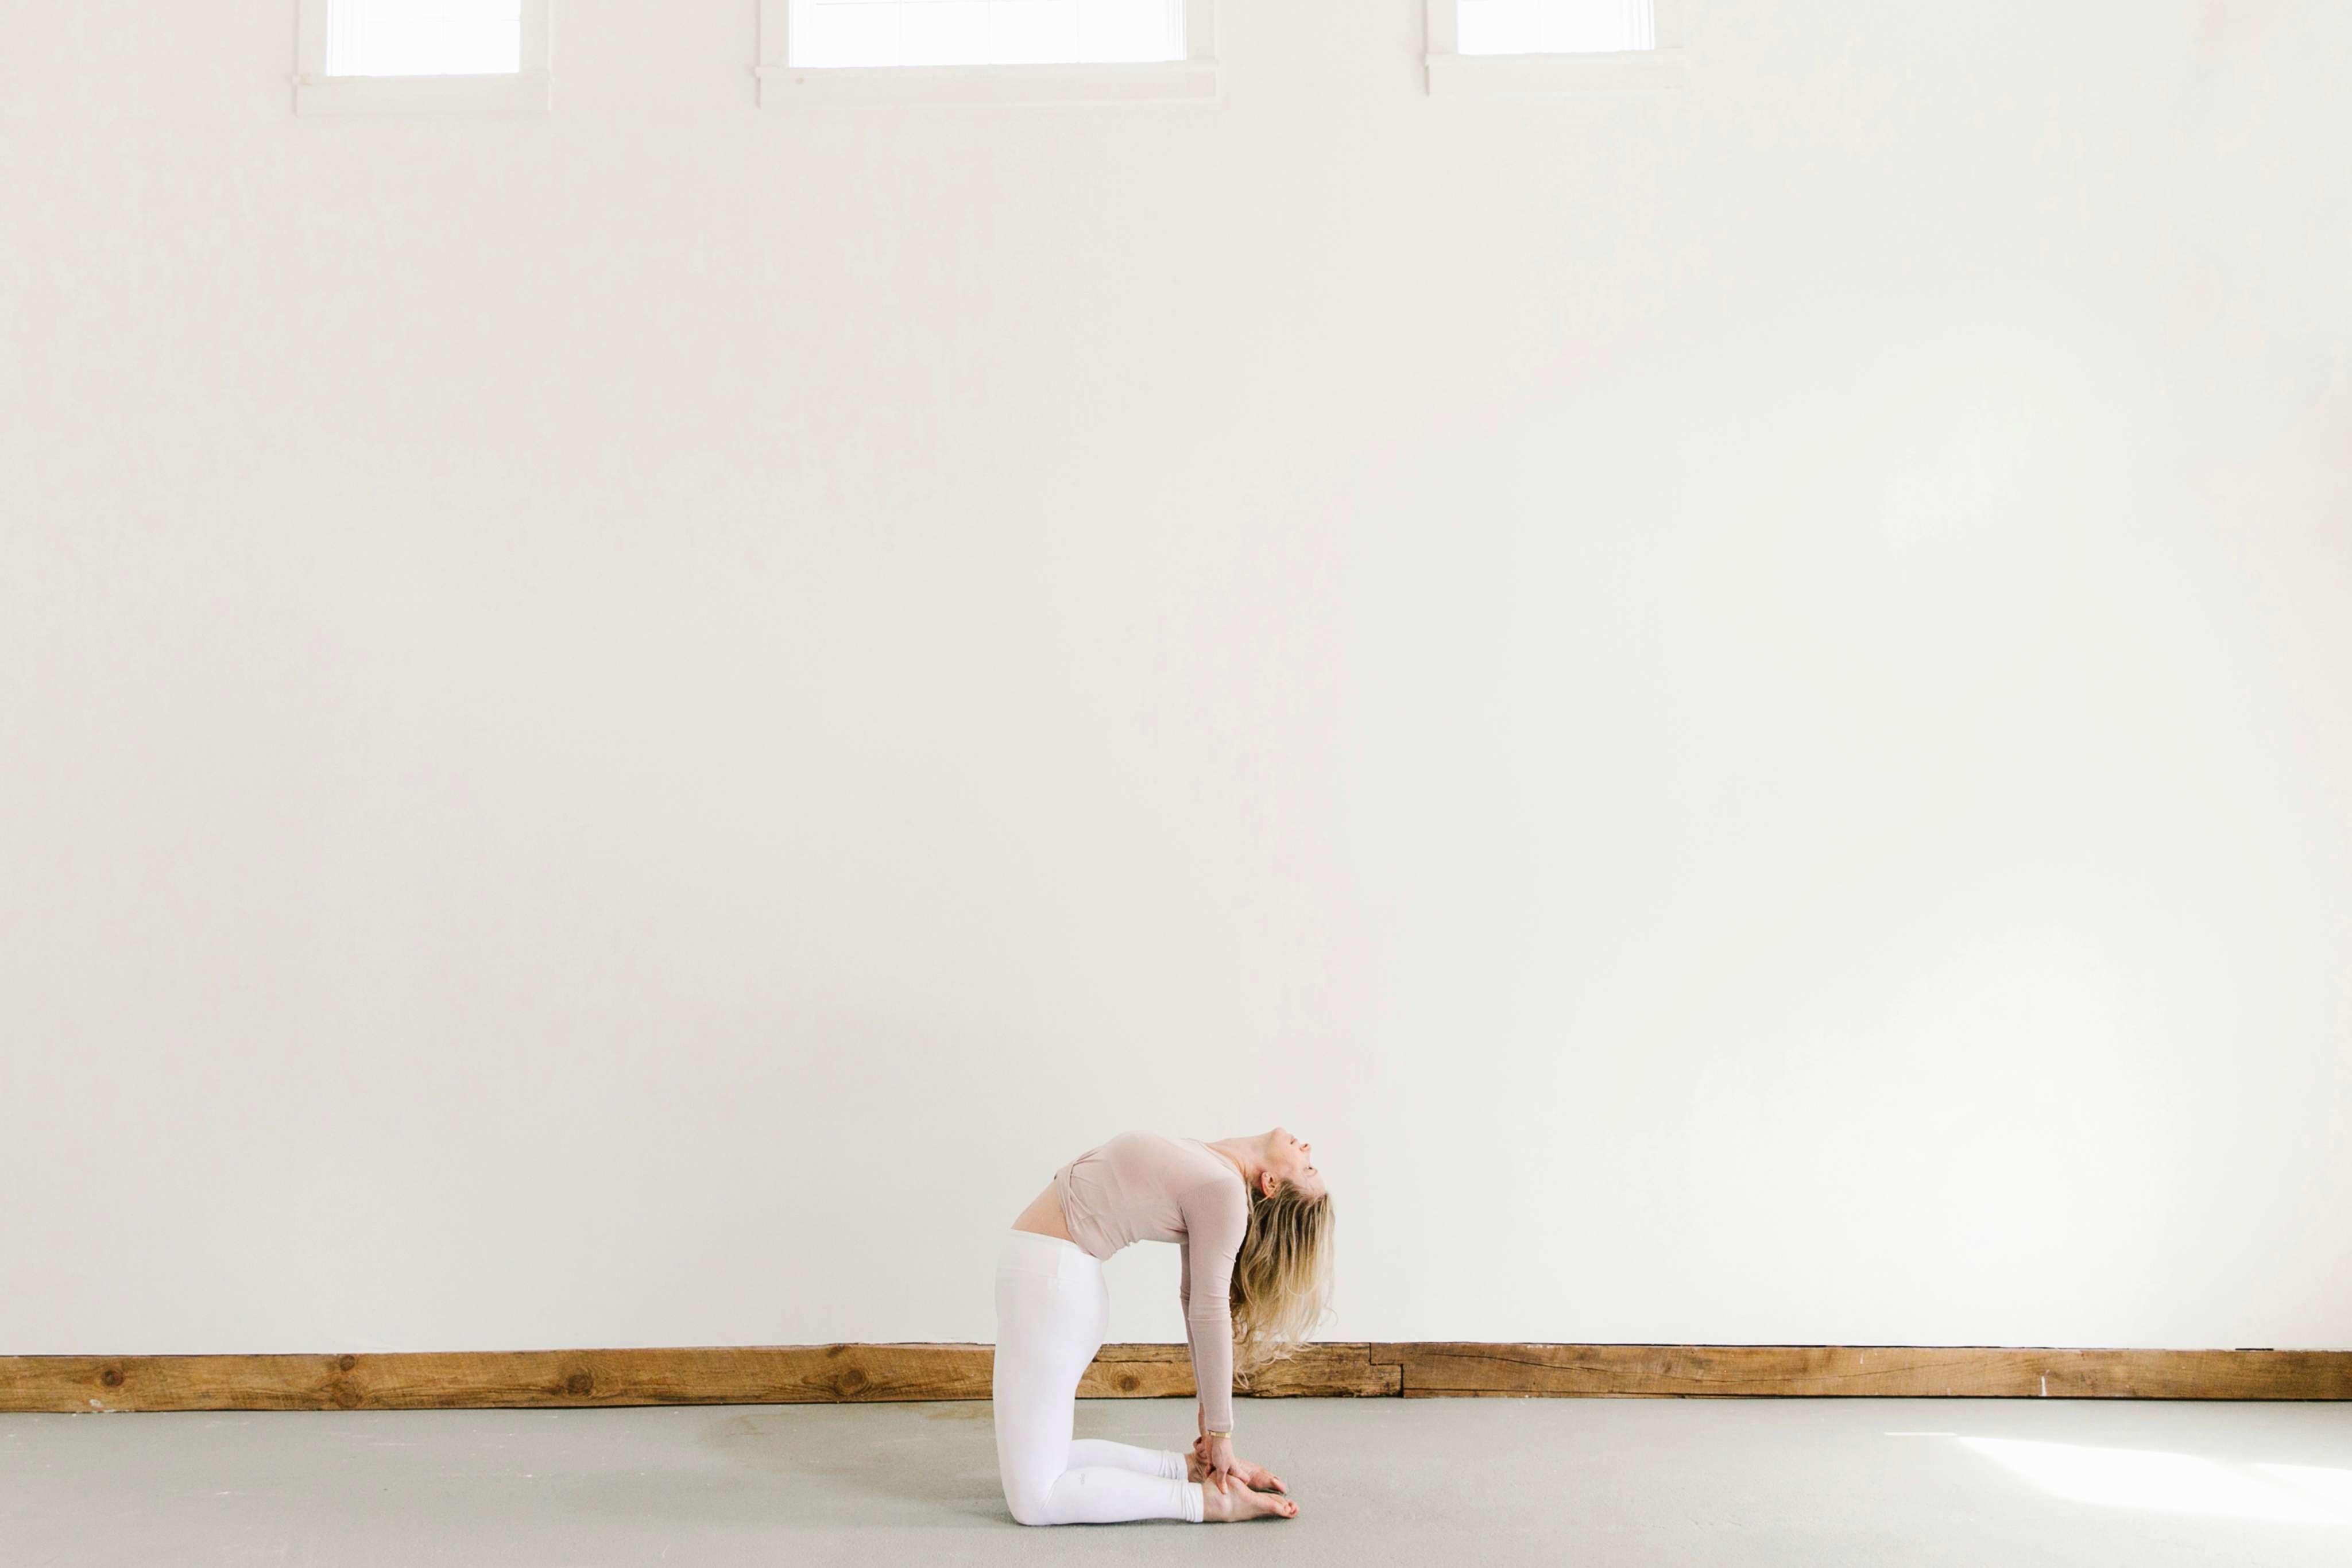 woman practicing yoga pose called Camel wearing white pants and blush top against big white wall with three windows above